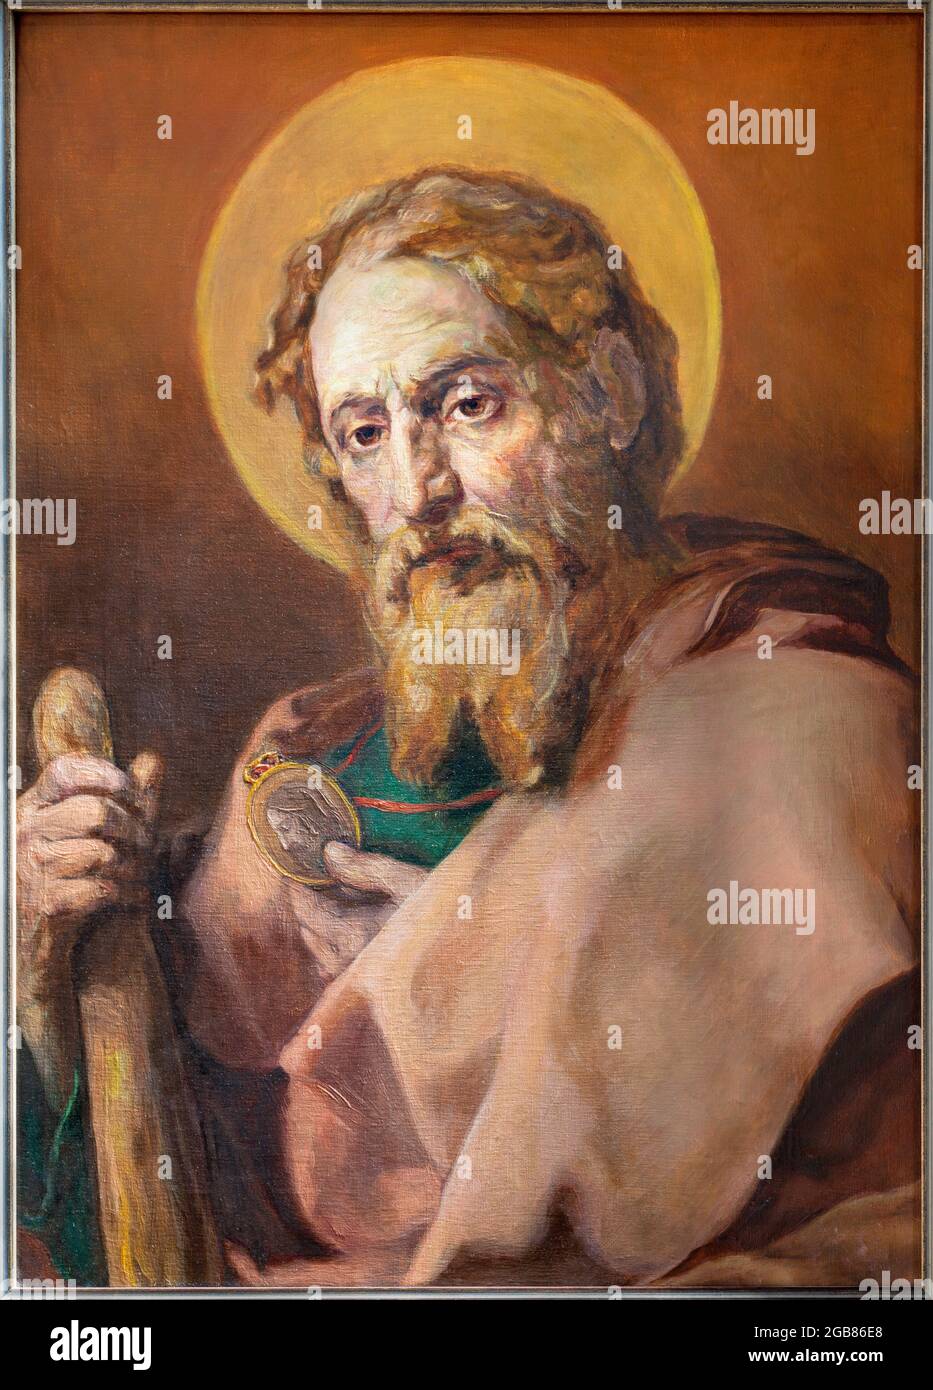 VIENNA, AUSTIRA - JULI 5, 2021: The painting of St. Jude Thaddeus of baroque st. Peter church or Peterskirche by unknown artist of 20. cent. Stock Photo